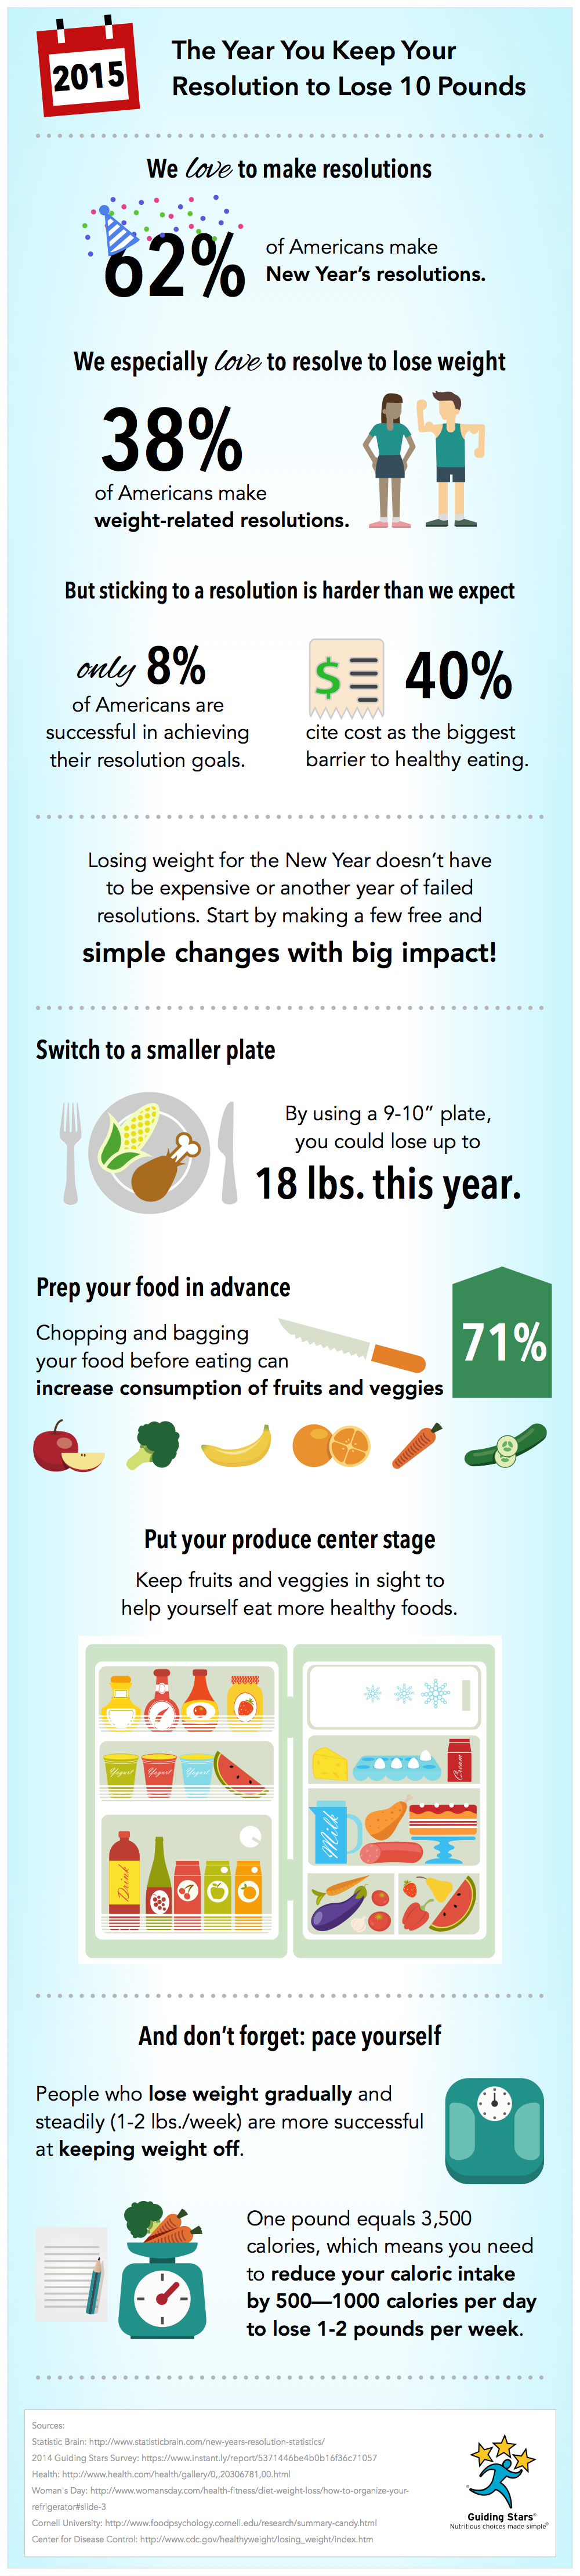 2015 The Year You Keep Your Resolution to Lose 10 Pounds - A Guiding Stars Infographic